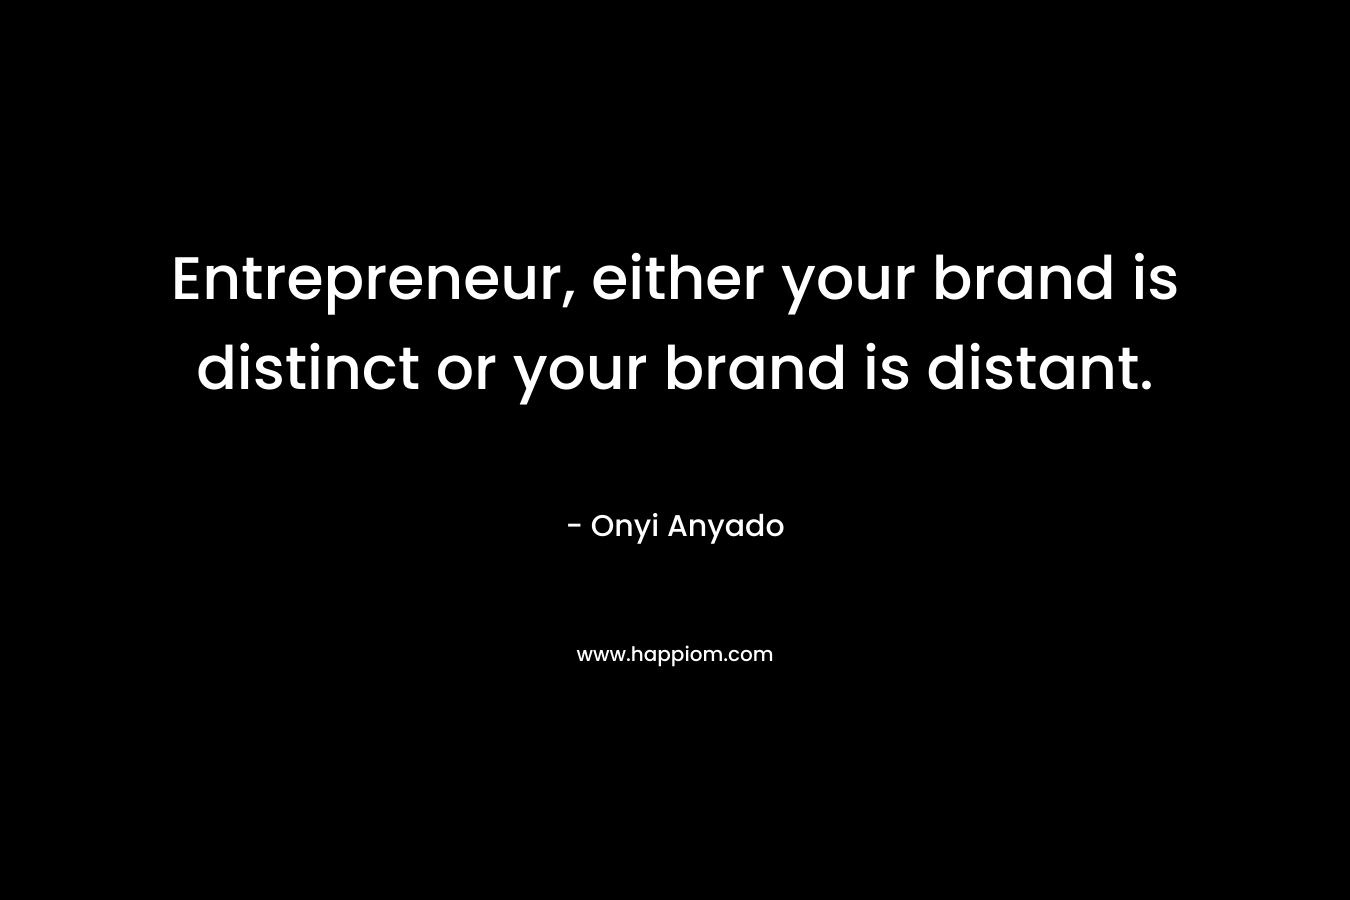 Entrepreneur, either your brand is distinct or your brand is distant. – Onyi Anyado